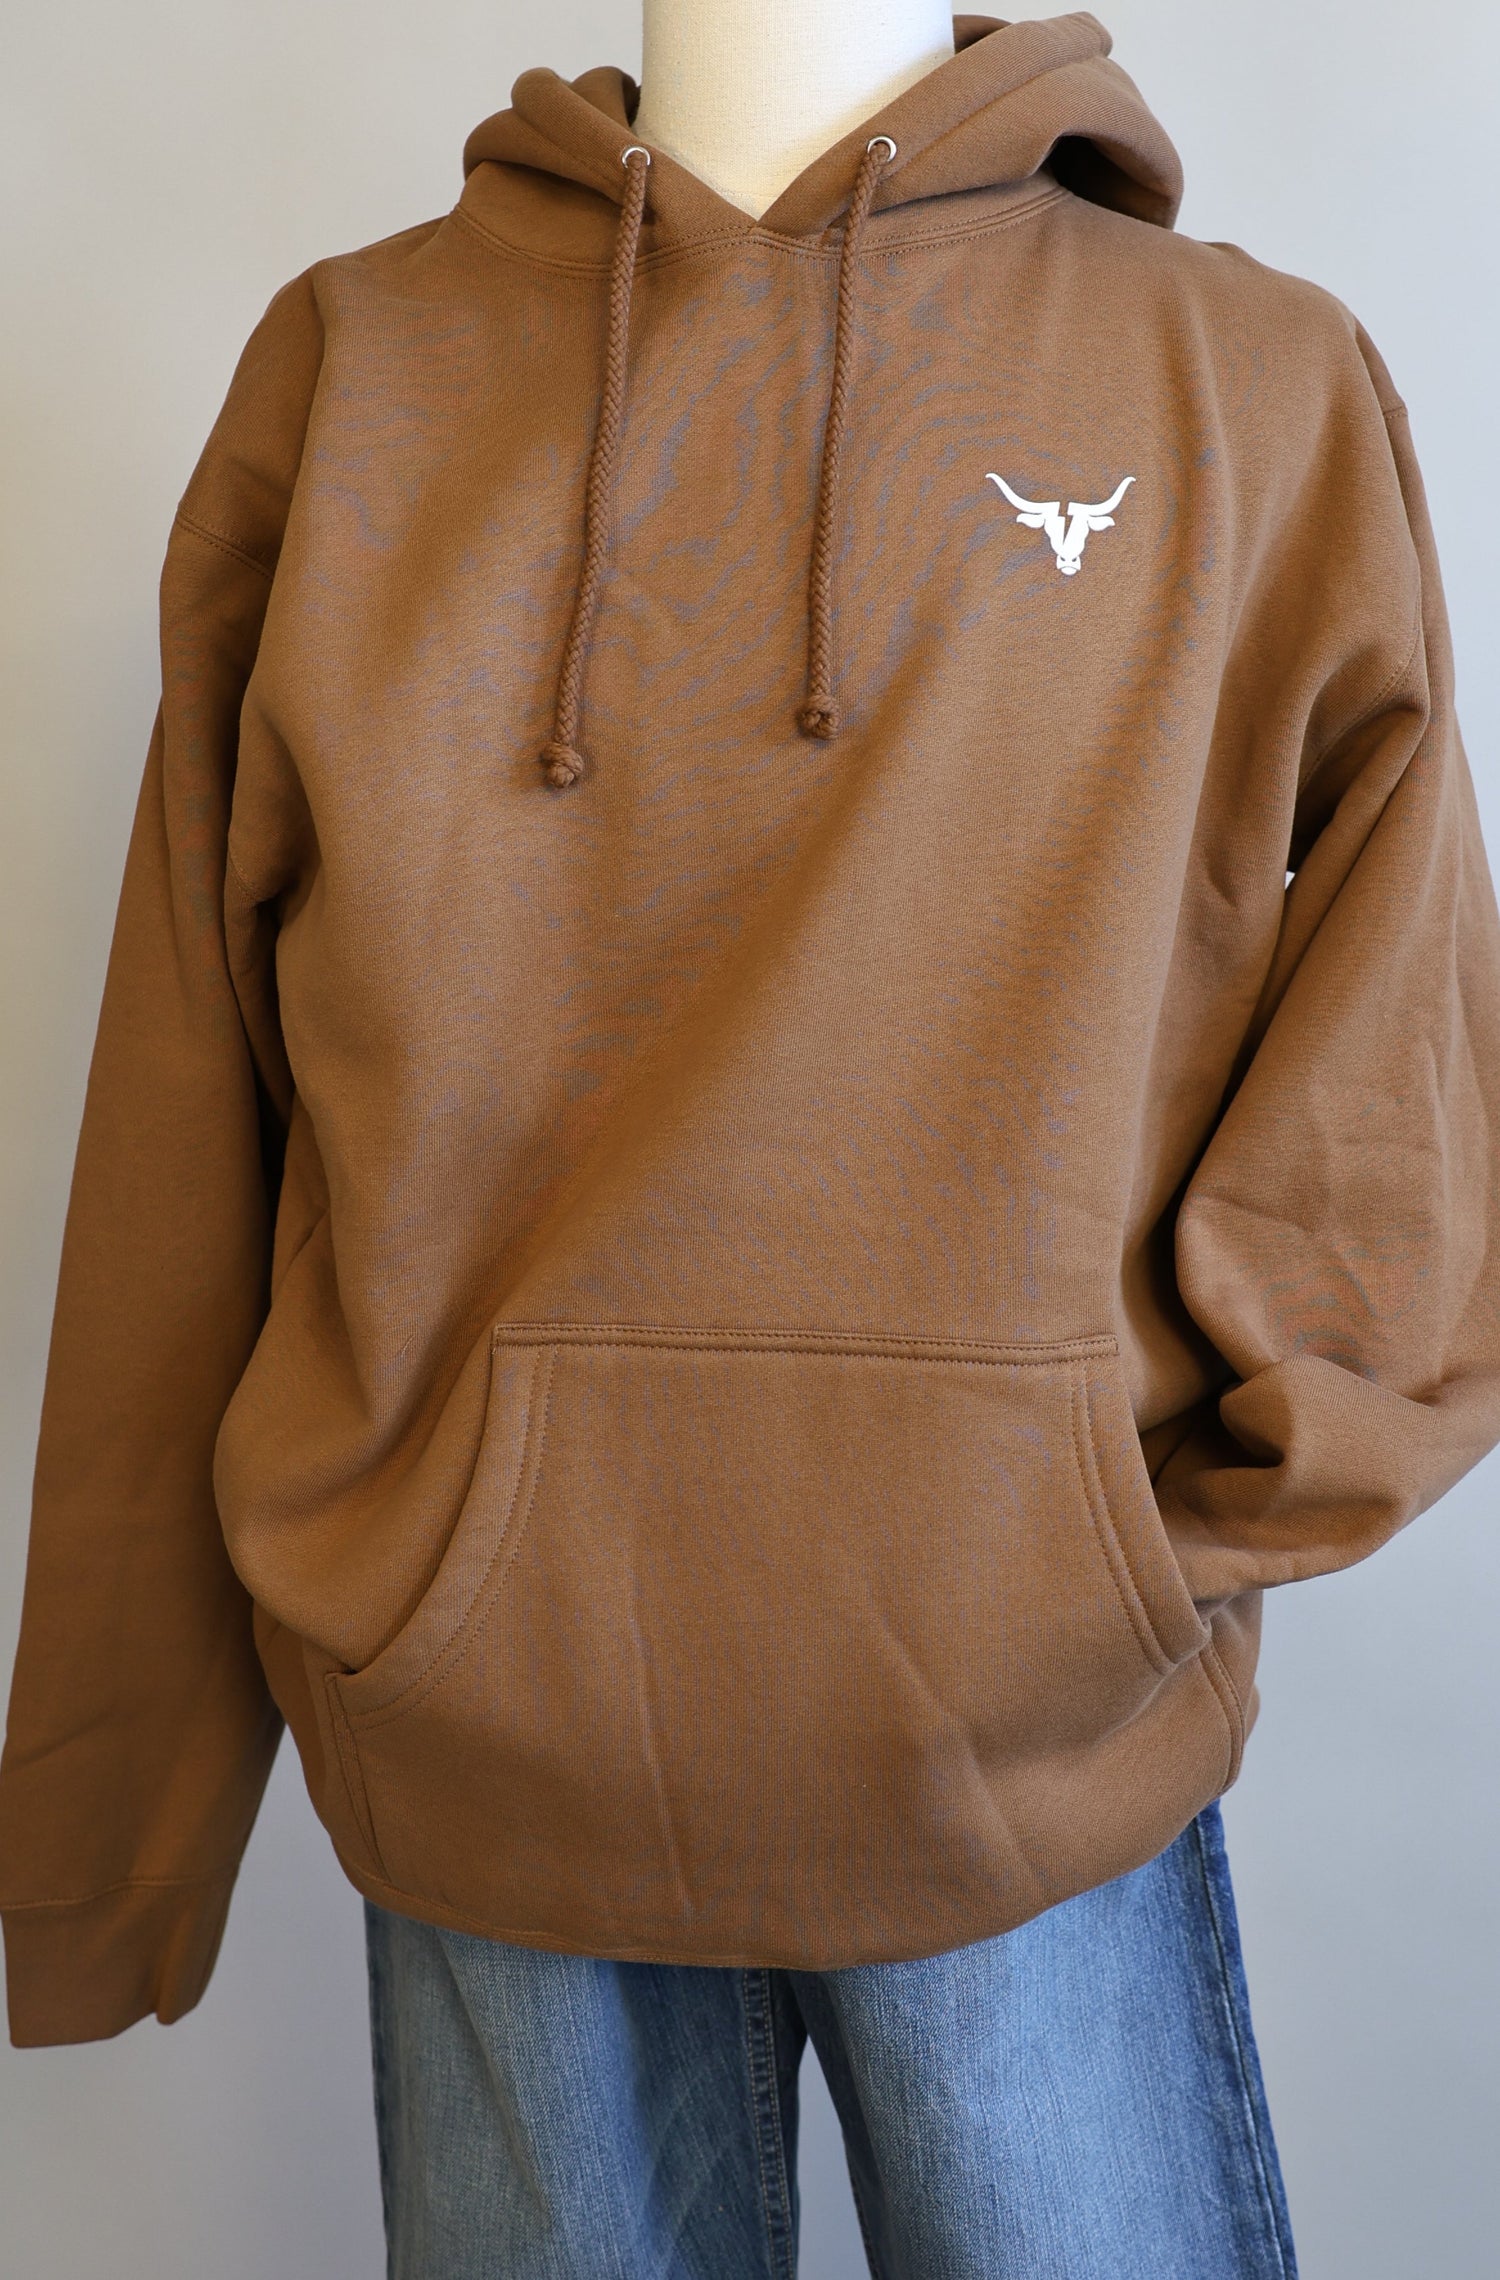 Bolt Ranch Adult Hoodie in Enhanced Saddle